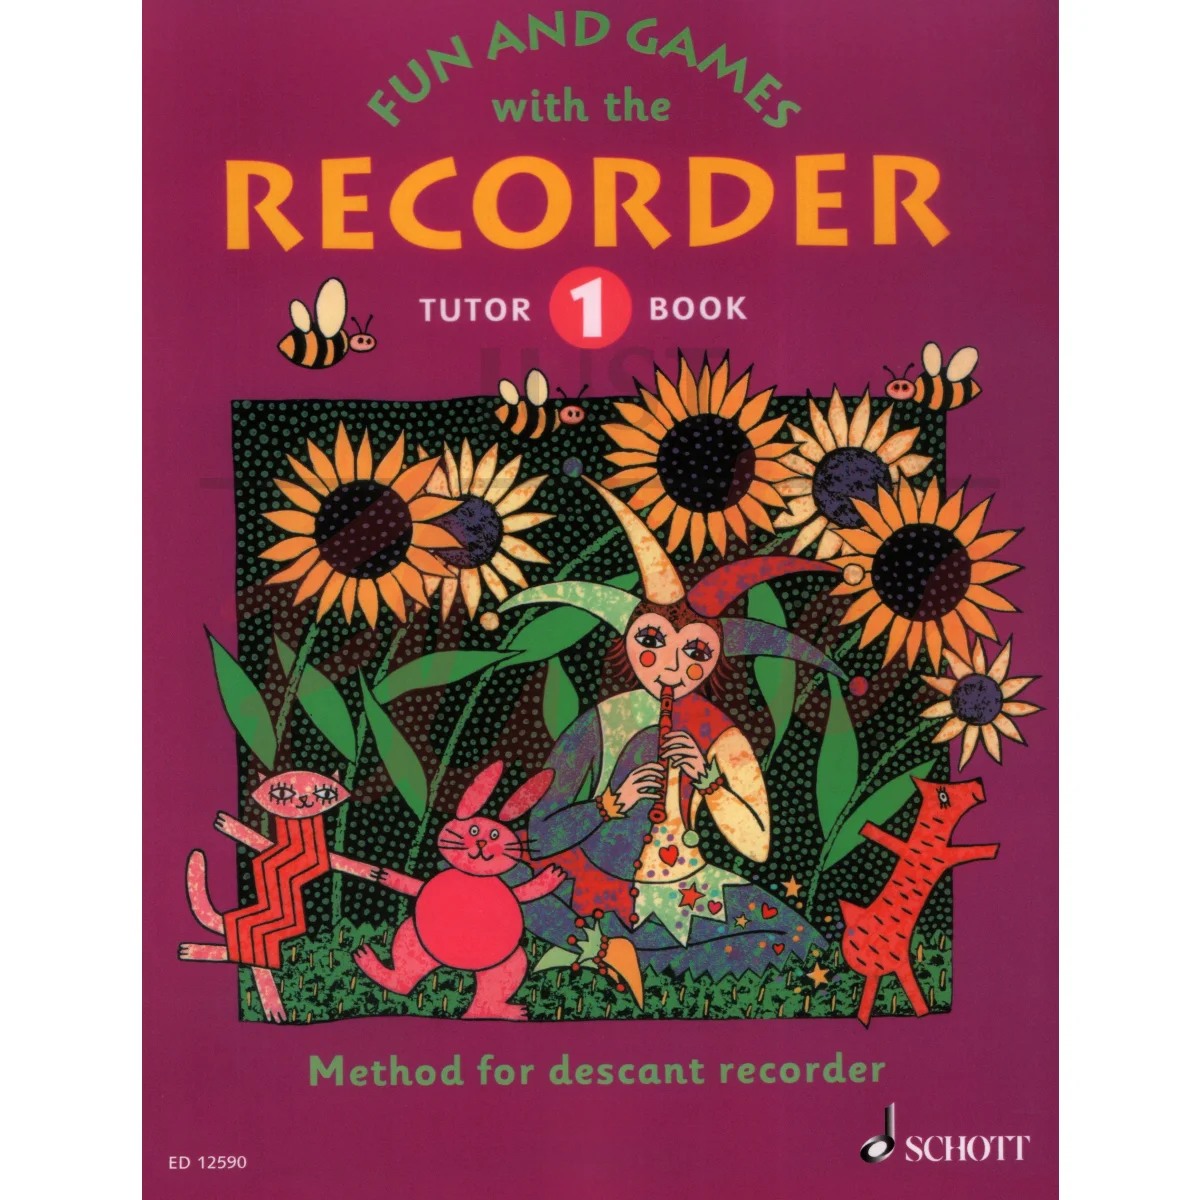 Fun and Games with the Recorder Tutor Book 1 [Descant Recorder]